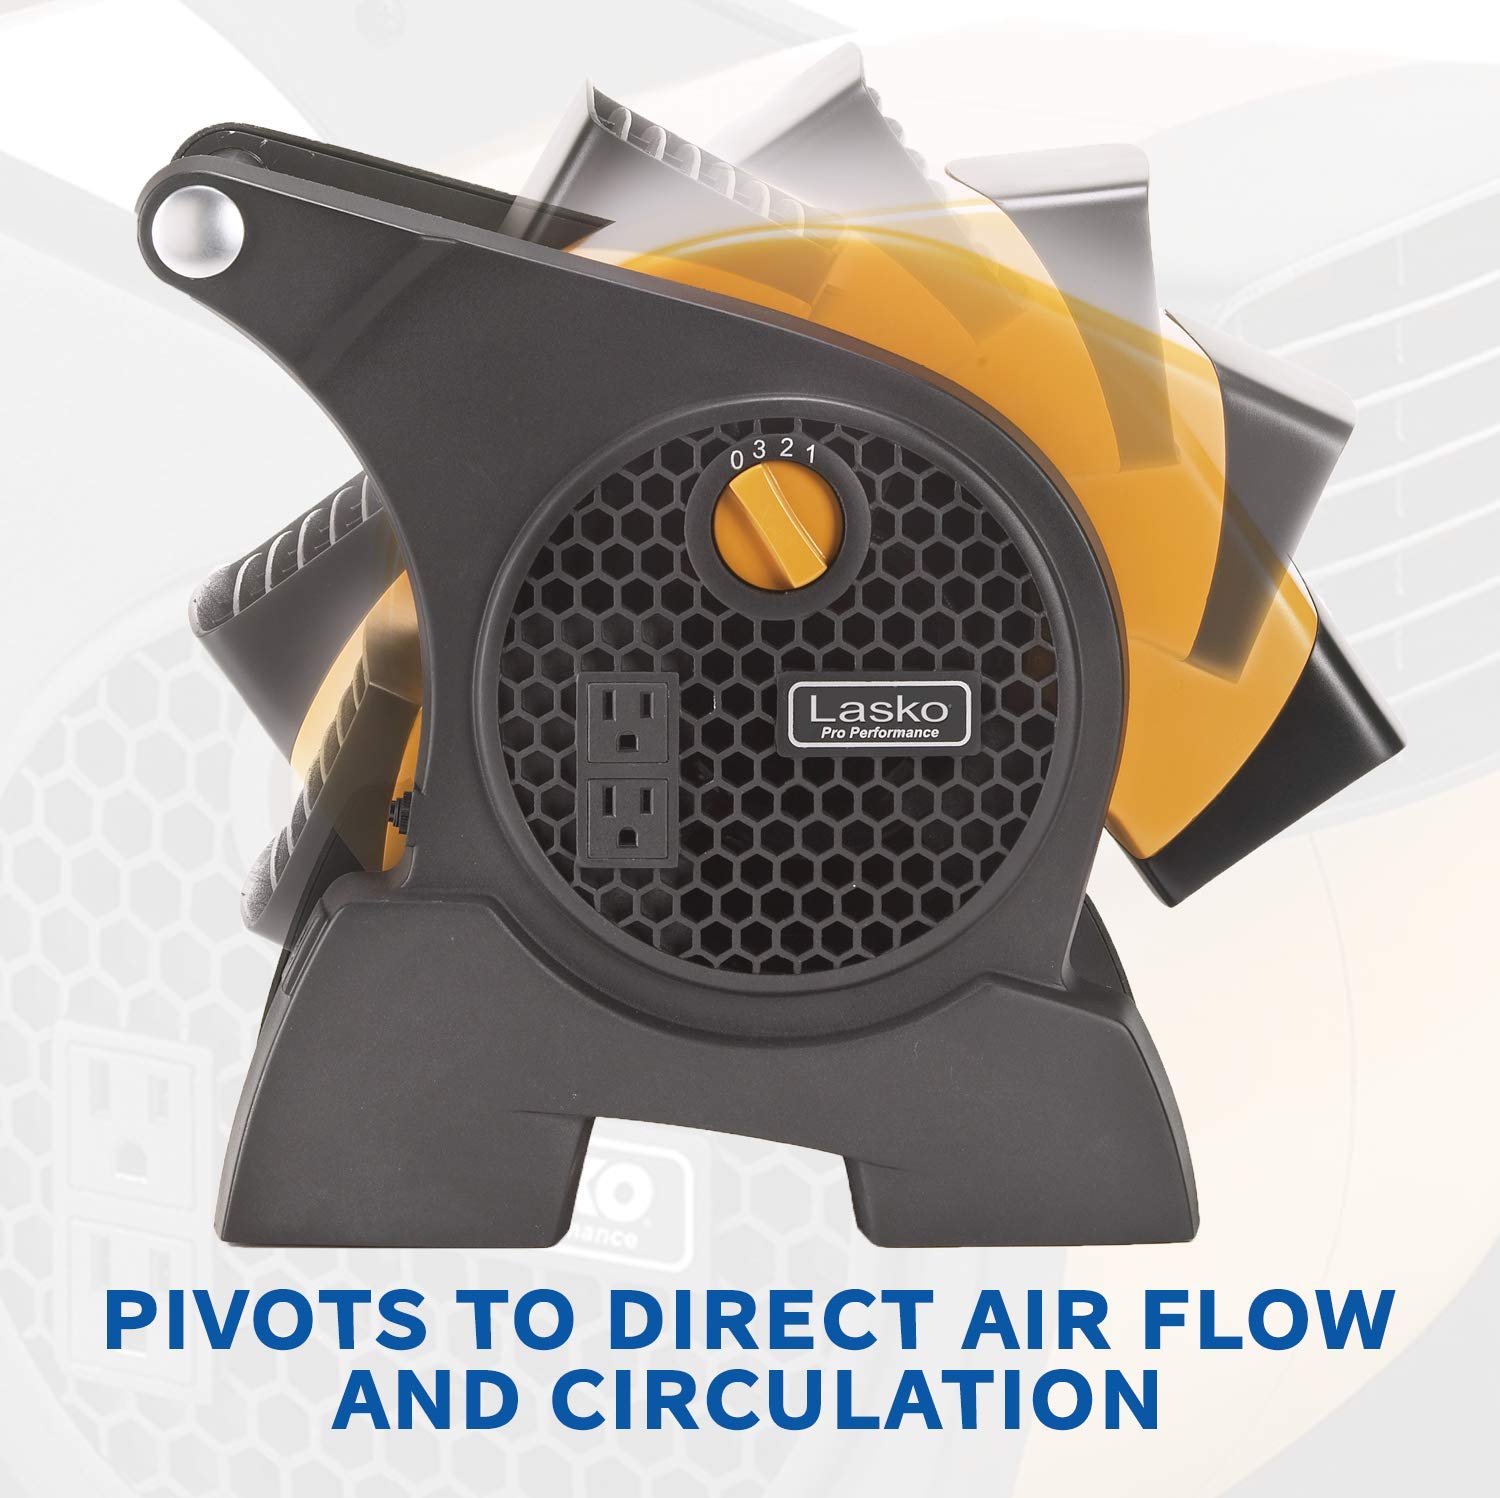 Lasko Pro-Performance High Velocity Utility Fan-Features Pivoting Blower and Built-in Outlets, 1, Yellow 4900